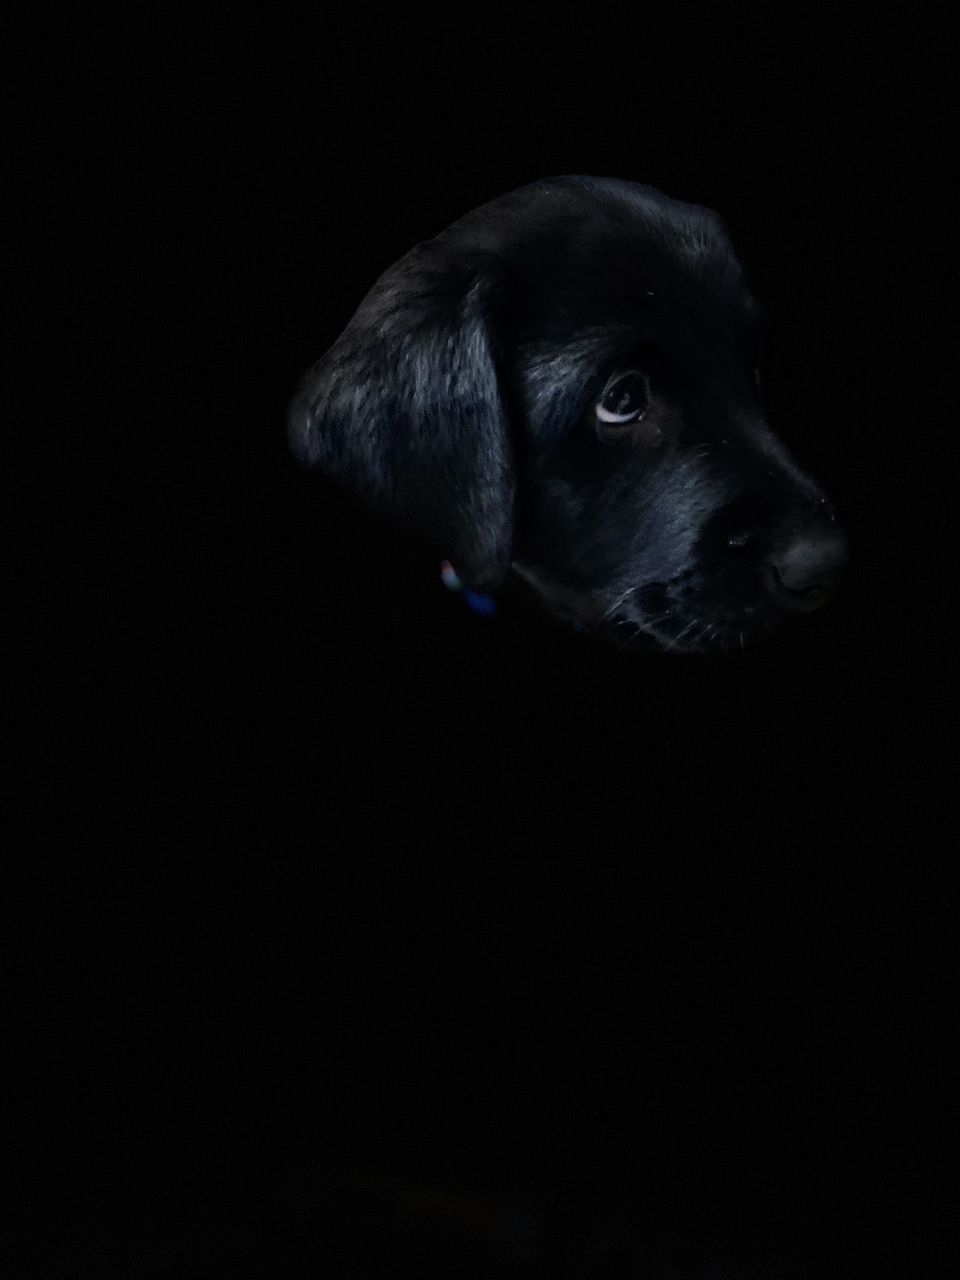 DOG LOOKING AWAY IN BLACK BACKGROUND